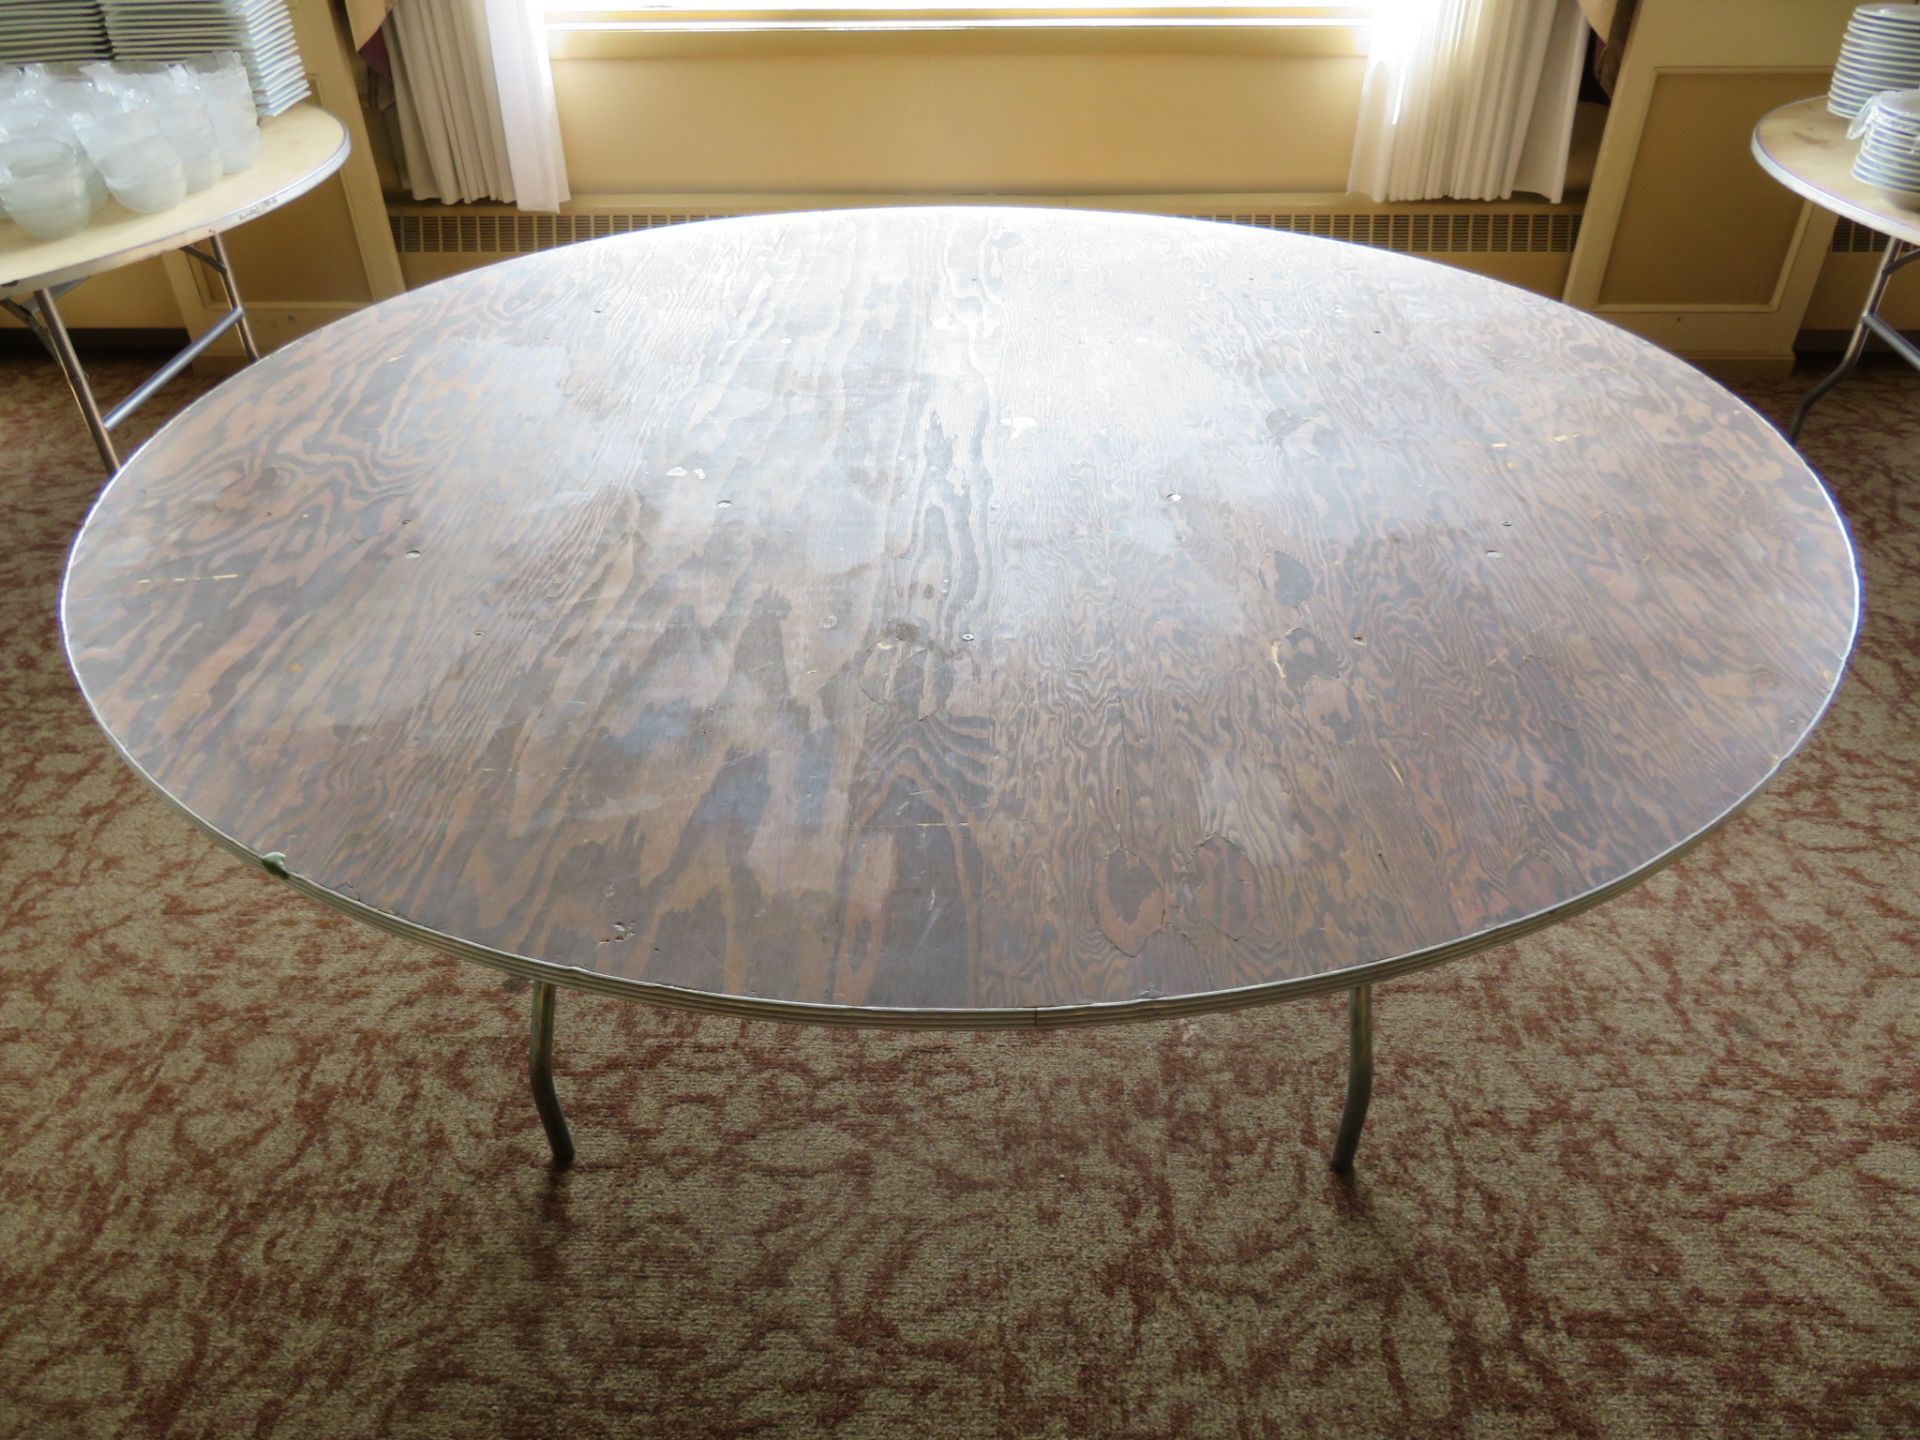 (16) 72" Round Tables